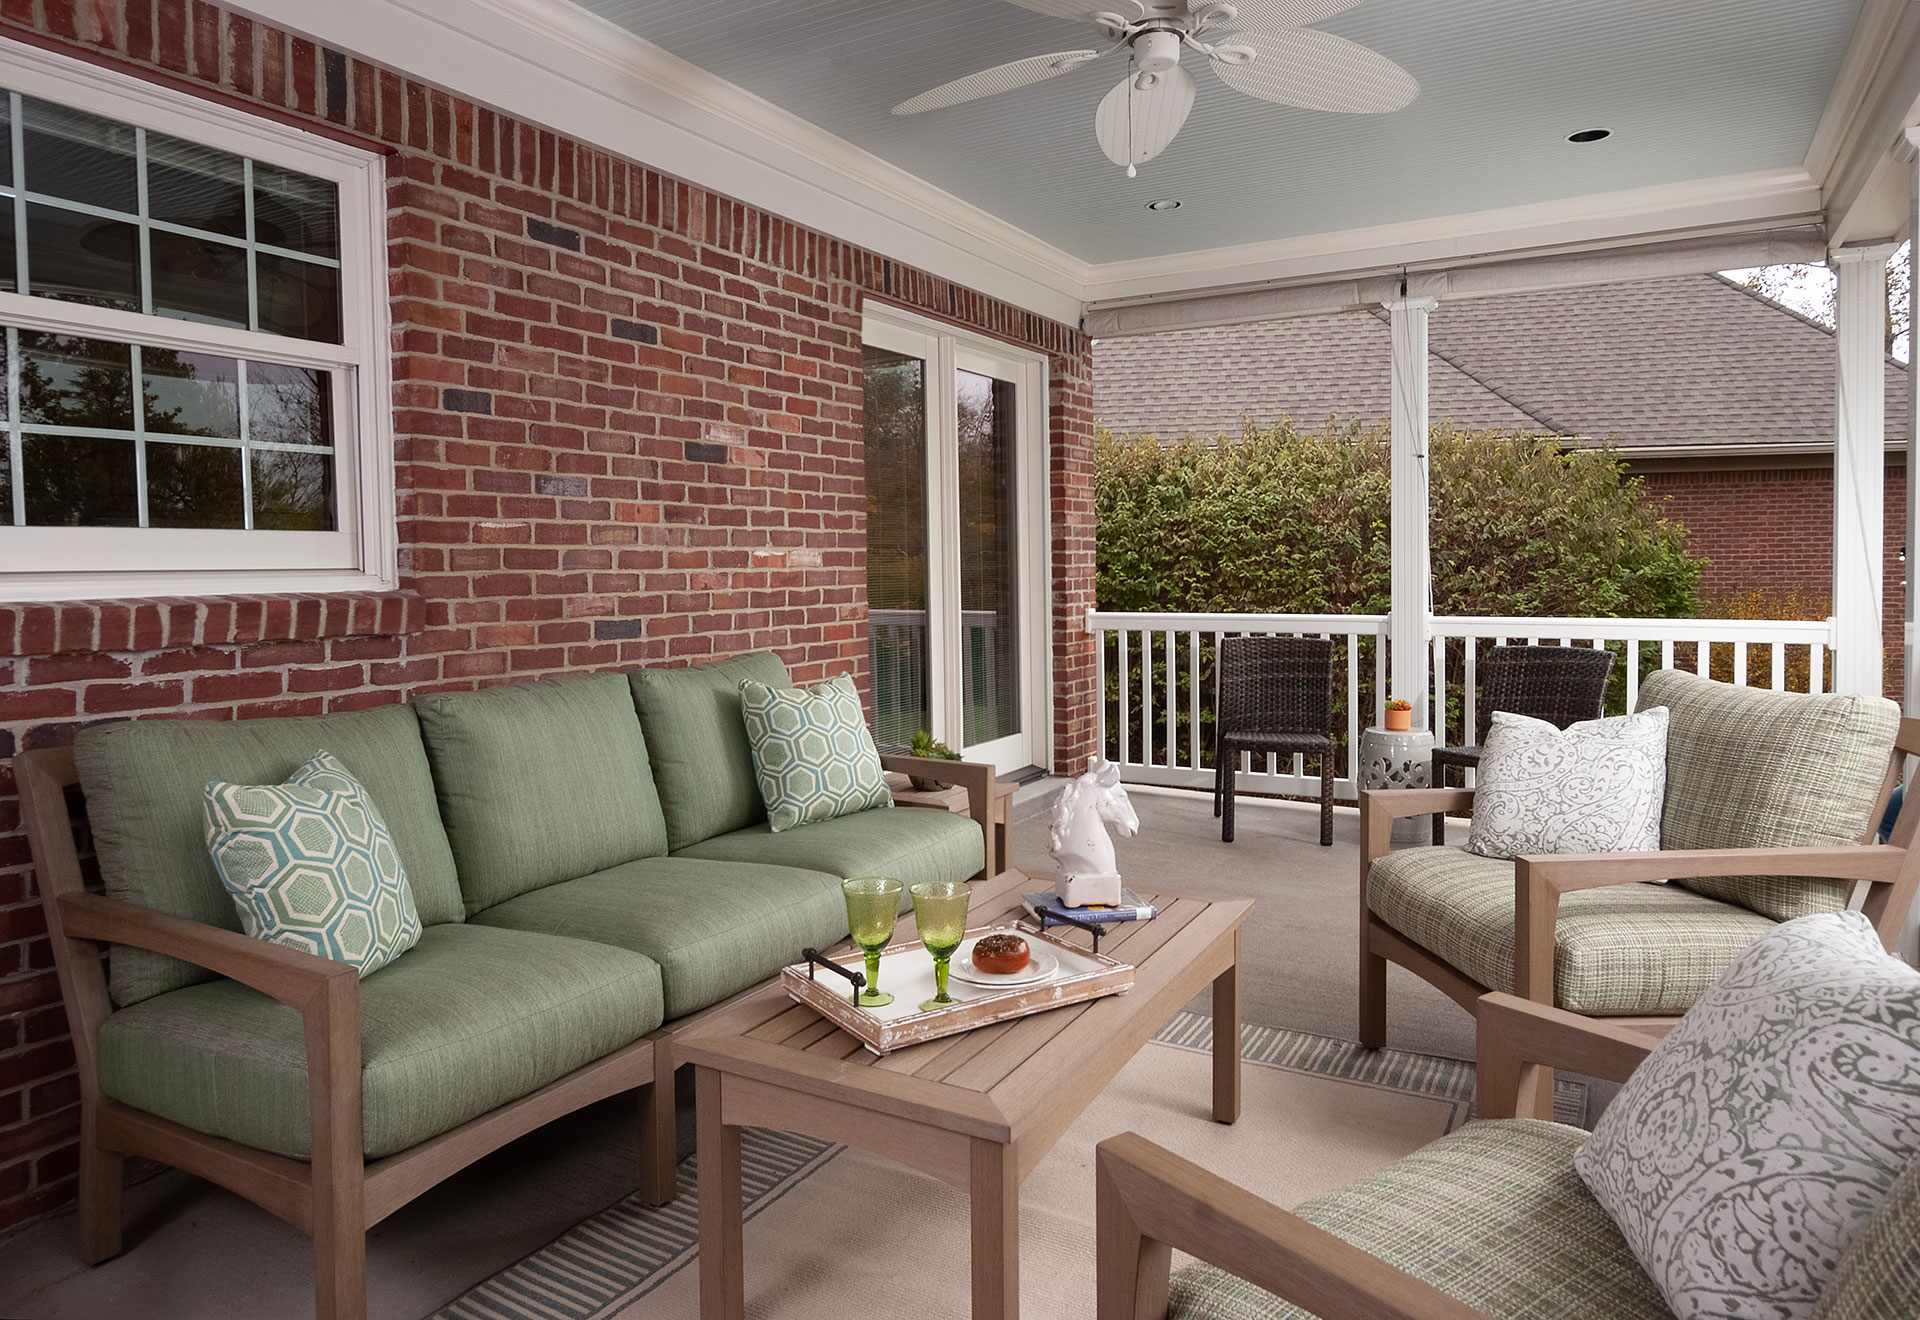 Prepare Your Porch for Spring: Consider These Décor Tips